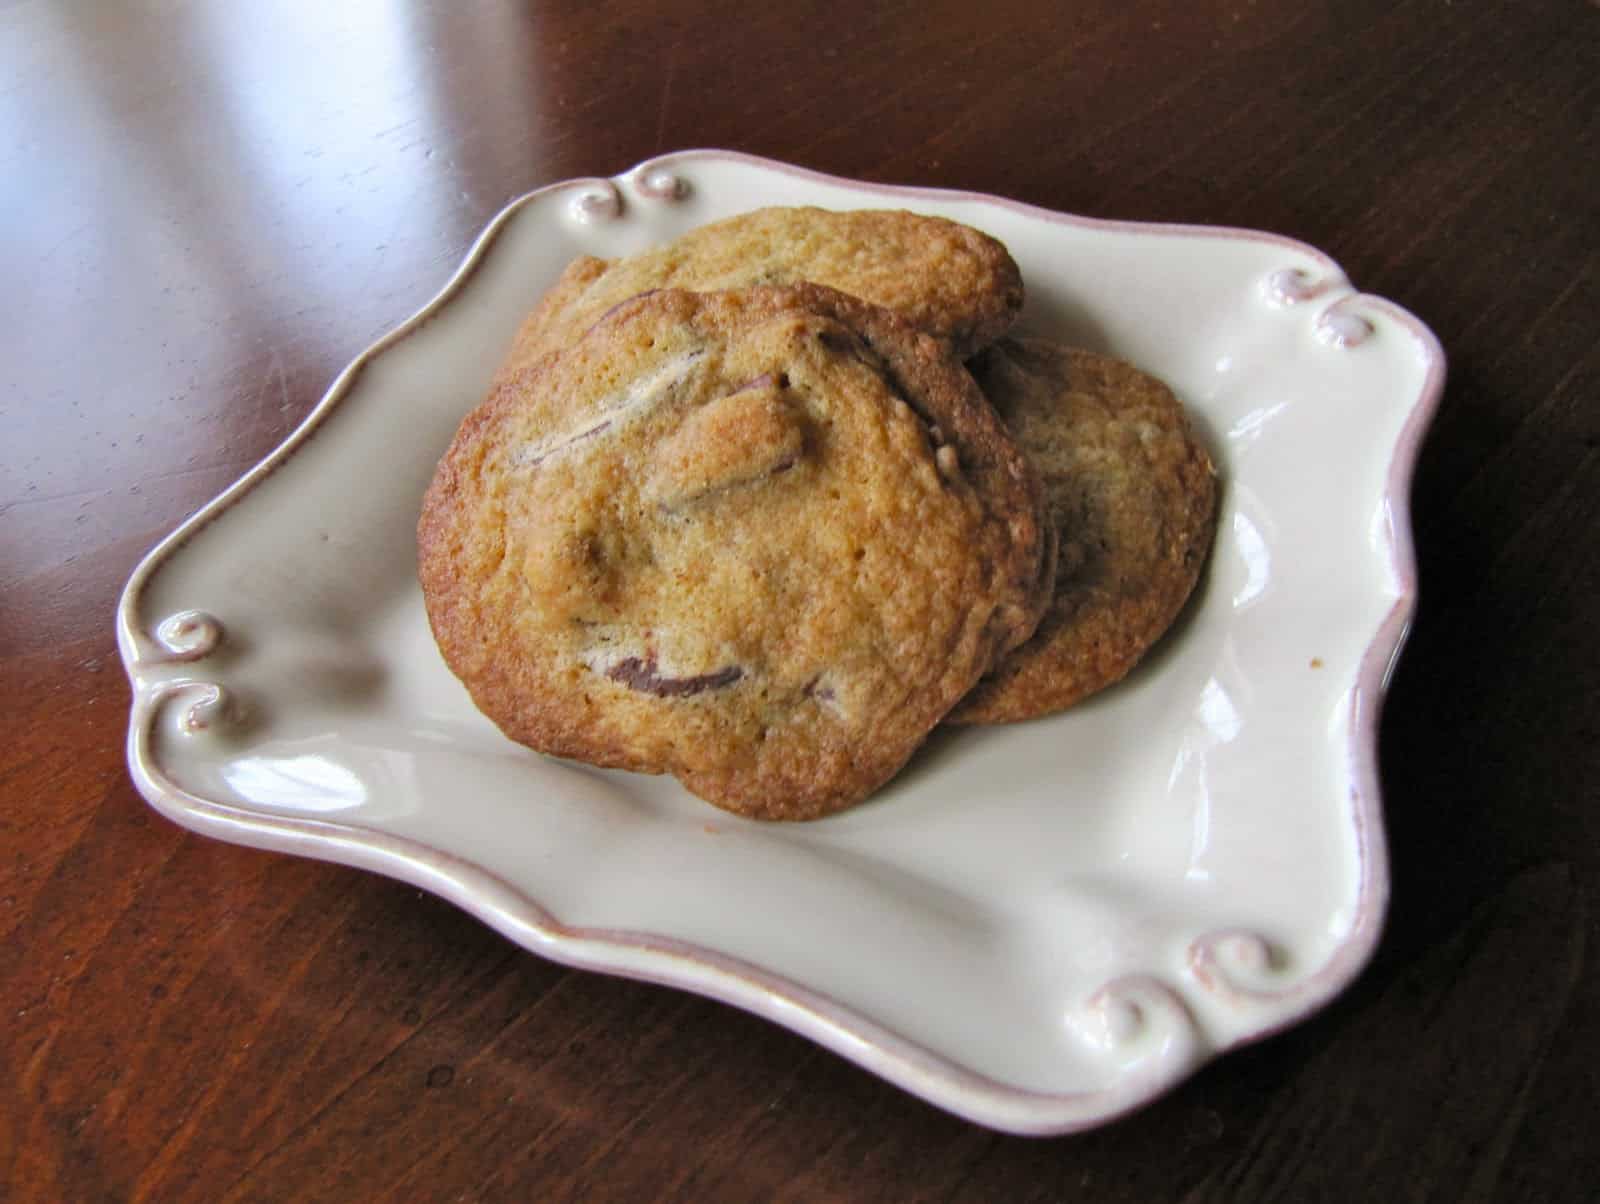 A few Chocolate Chip Cookies on a square plate.